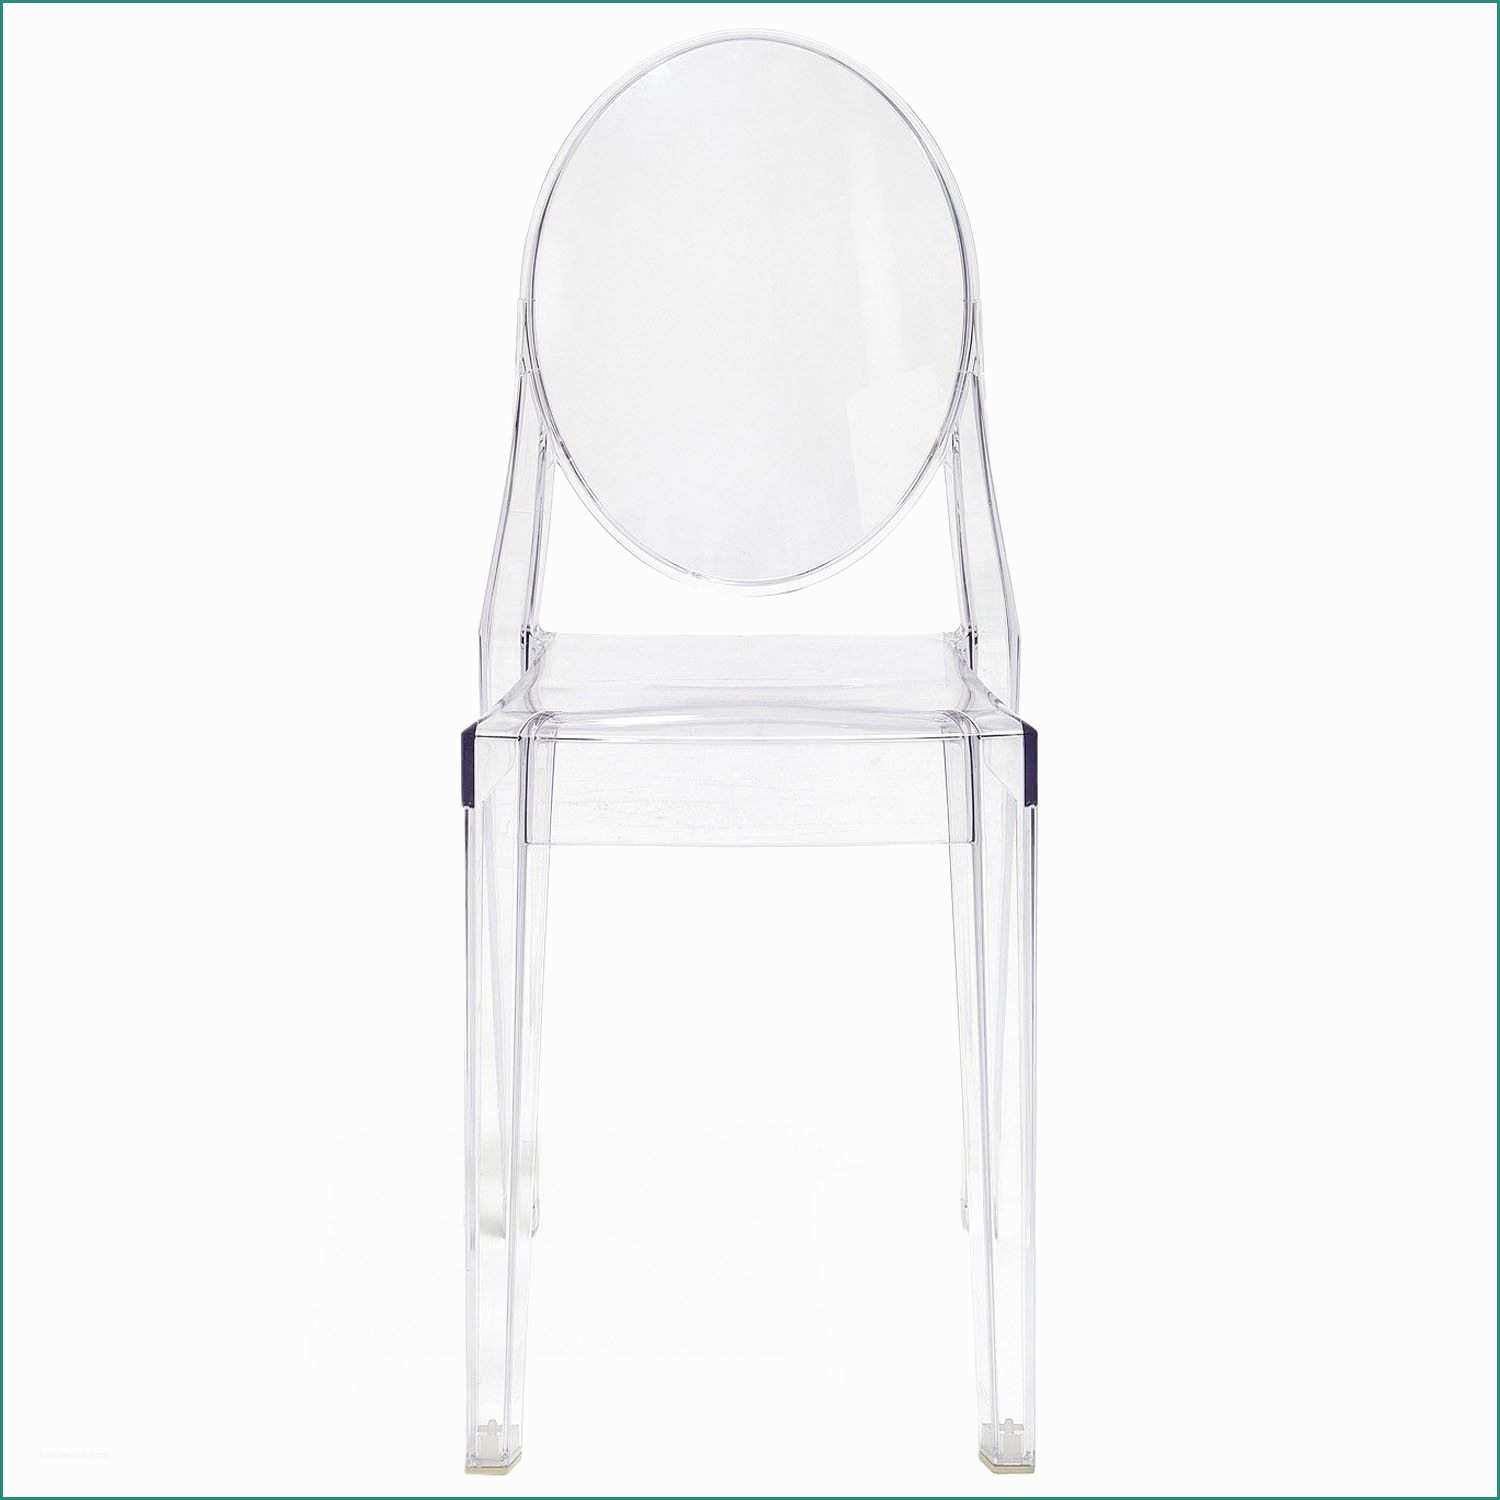 Kartell Victoria Ghost E A Slimmed Down Cousin to the Louis Ghost Chair the Victoria Ghost